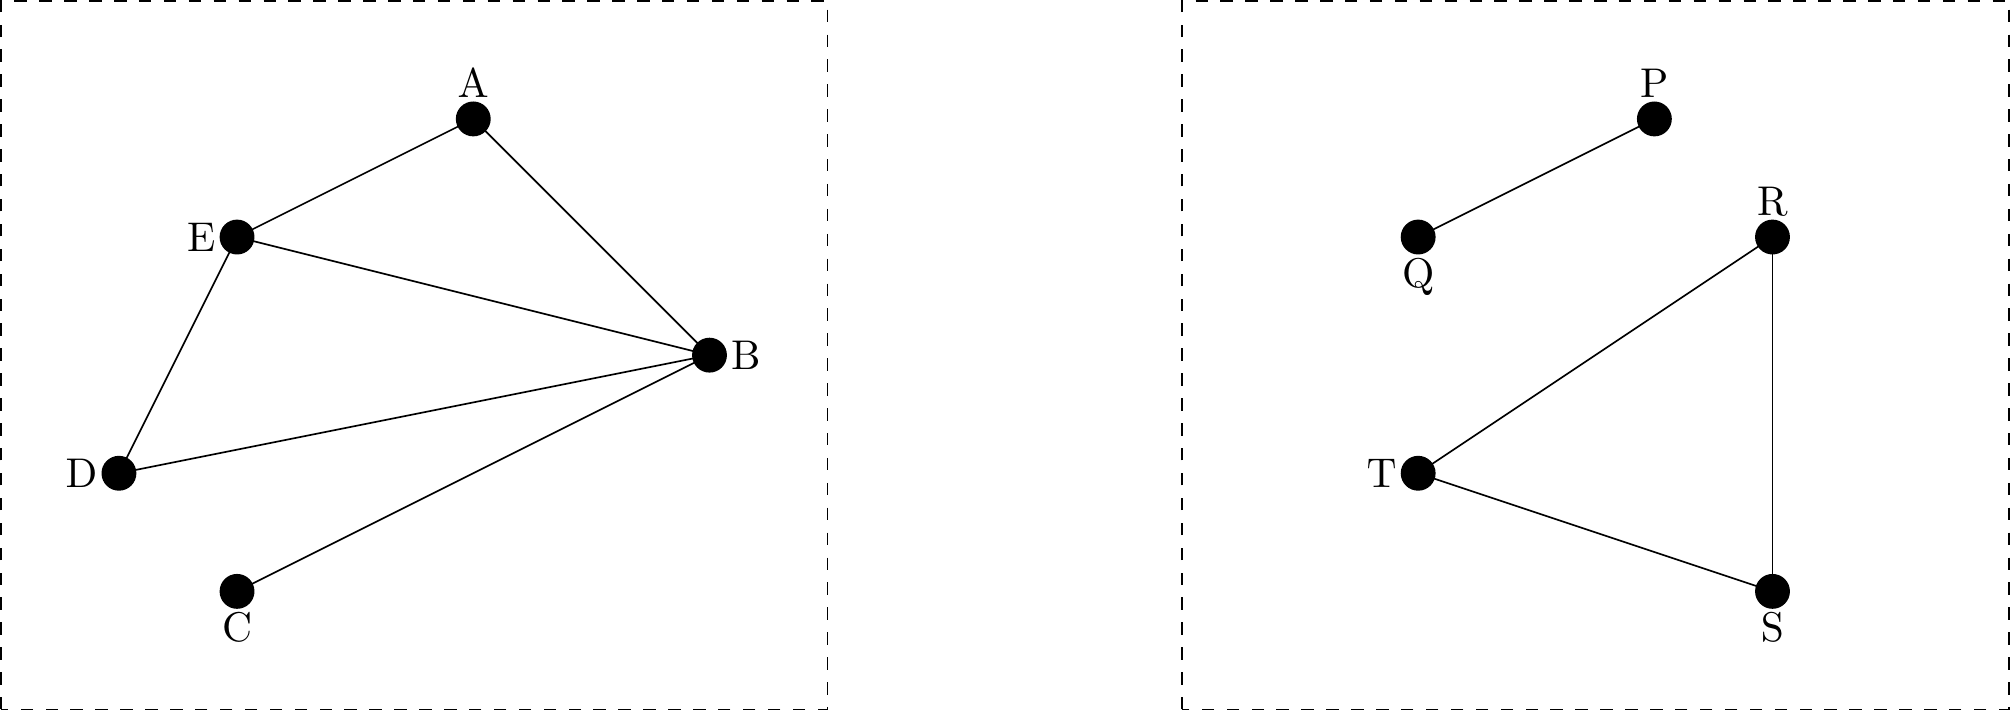 Two examples of graphs. The left-hand graph is a copy of the graph in Figure \@ref(fig:exdegseq). The right-hand graph has five vertices labelled P,Q,R,S and T. P and Q are joined. R, S and T are all joined, forming a triangle of edges.